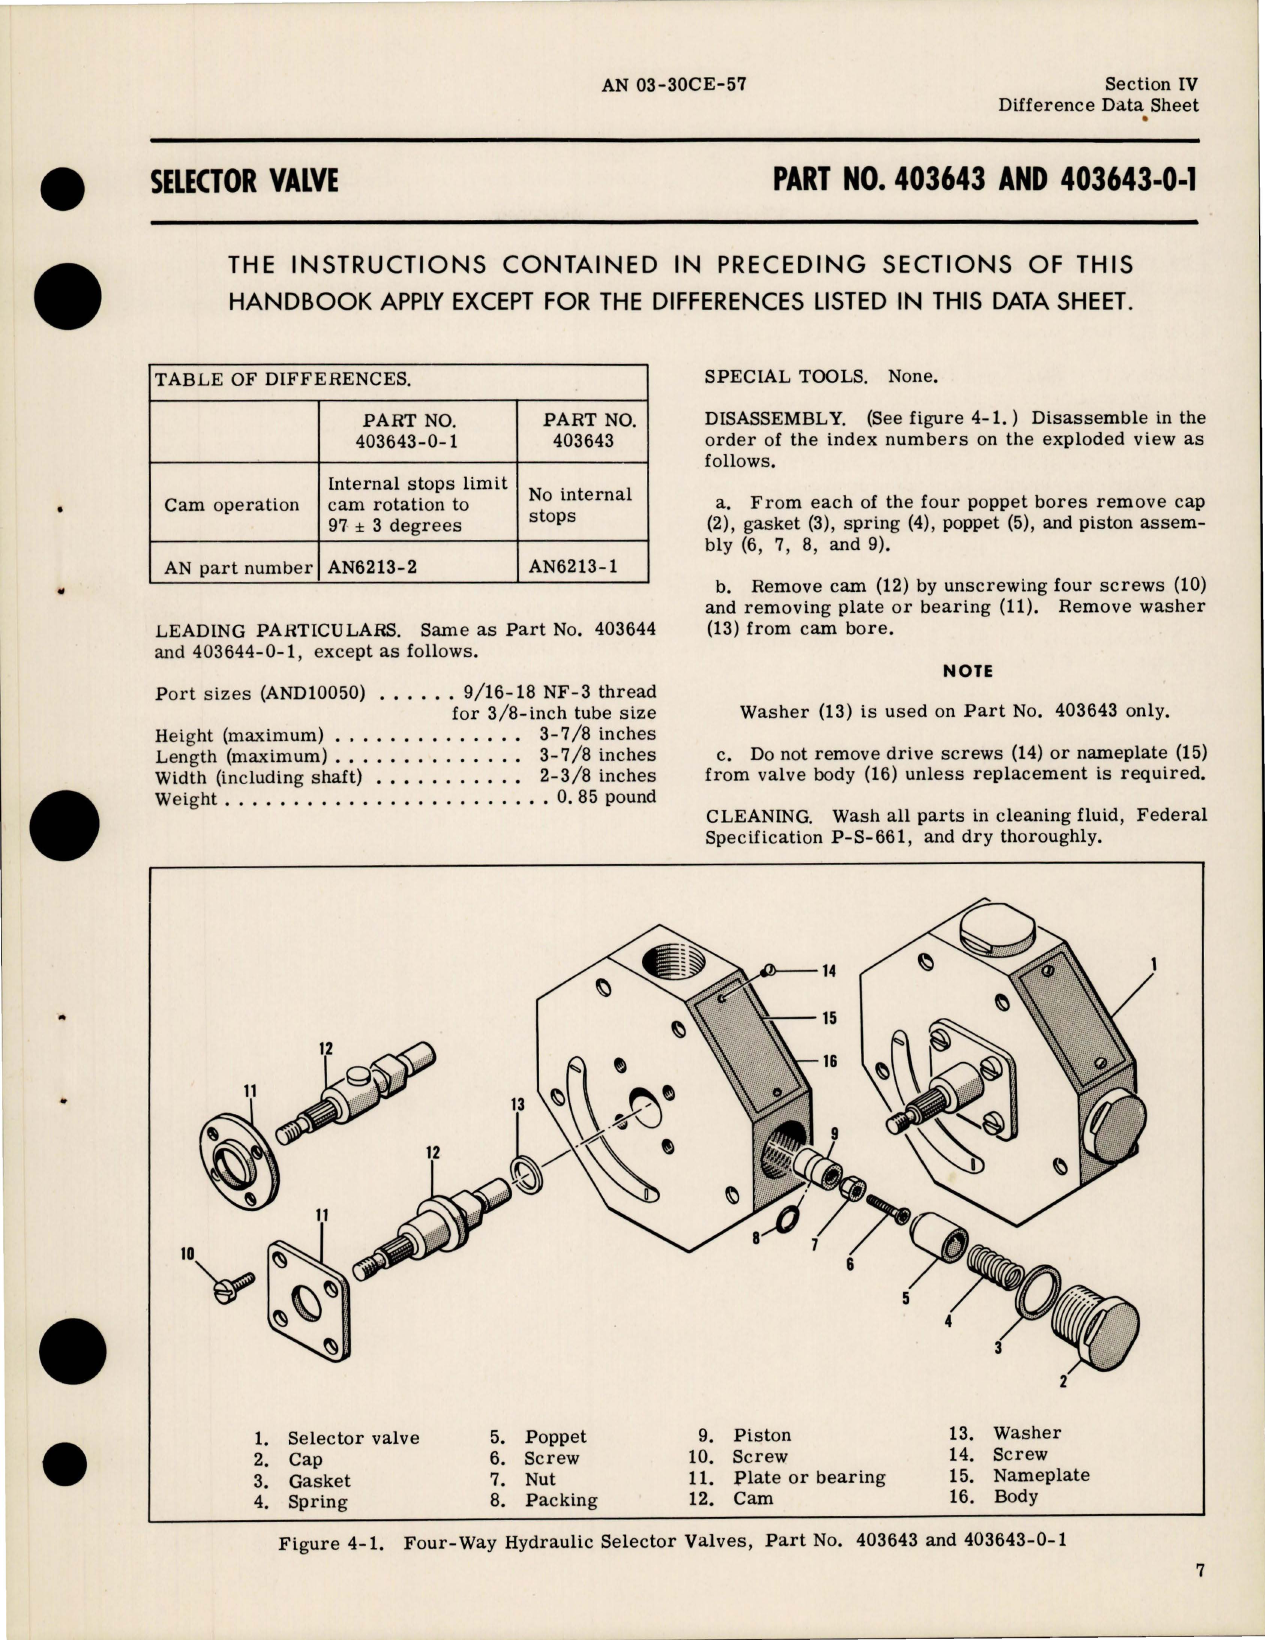 Sample page 9 from AirCorps Library document: Overhaul Instructions for Four-Way Hydraulic Selector Valves - 1500 psi 